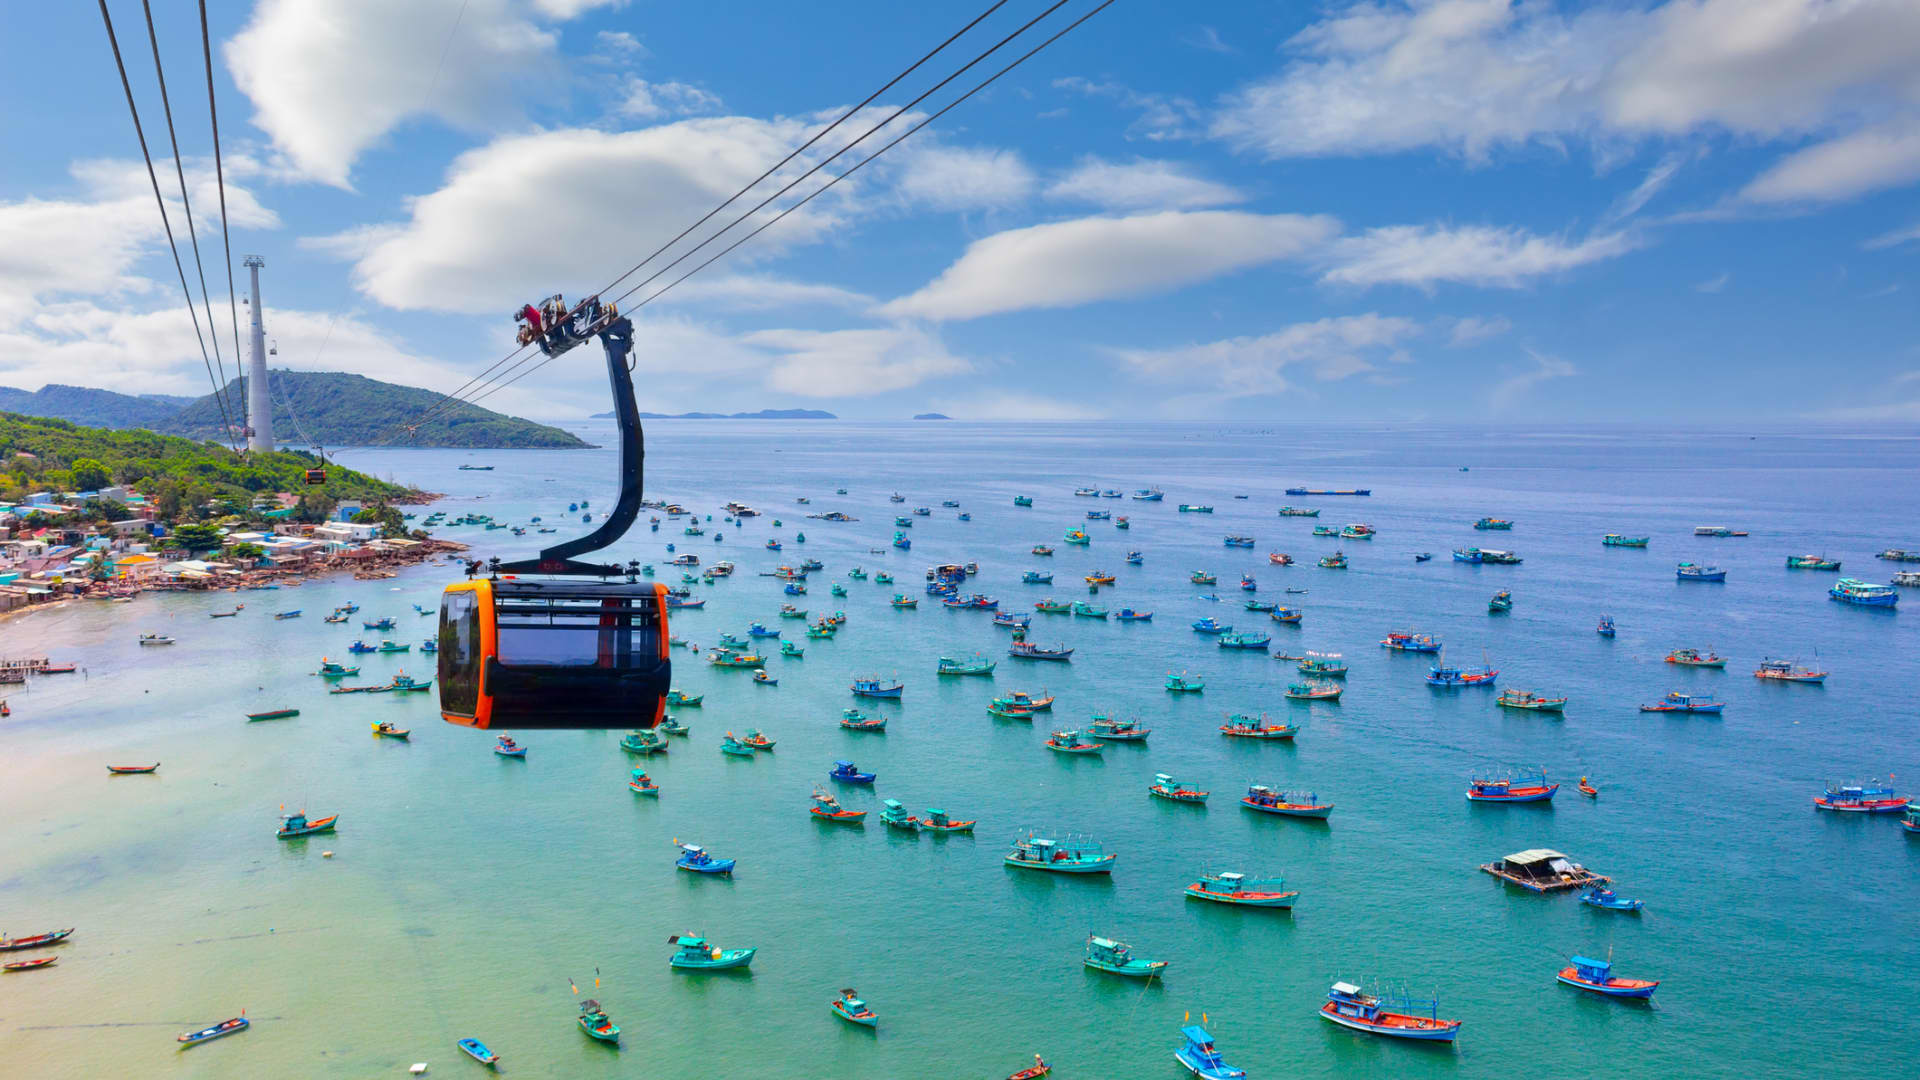 Phu Quoc's cable car is one of the longest in the world and covers a distance of nearly five miles in 15 minutes.